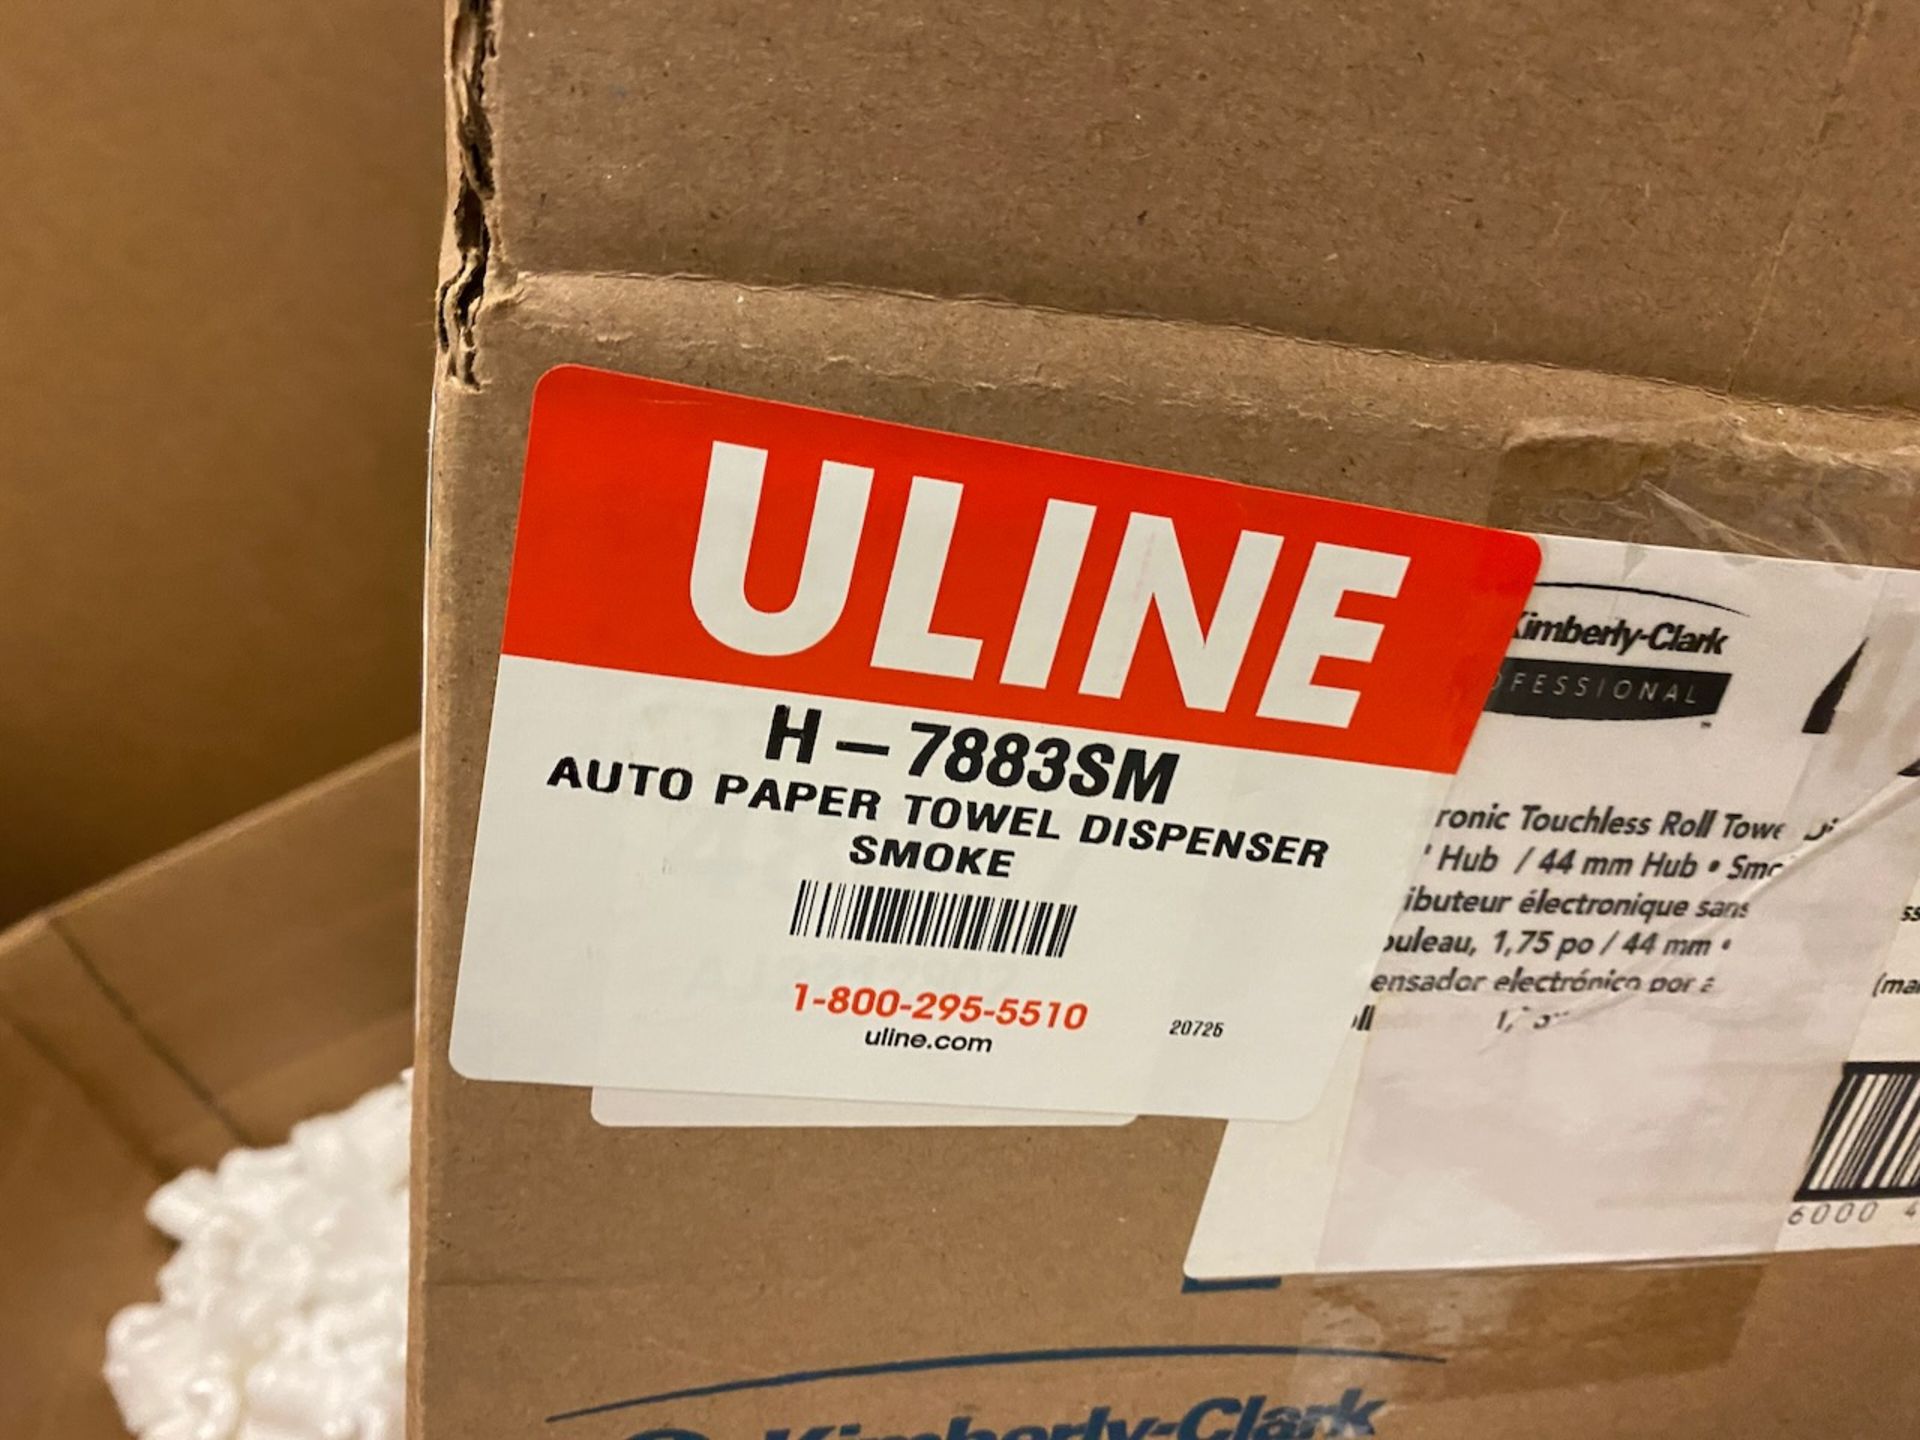 Pallet of Uline automatic paper towel dispensers. - Image 3 of 4